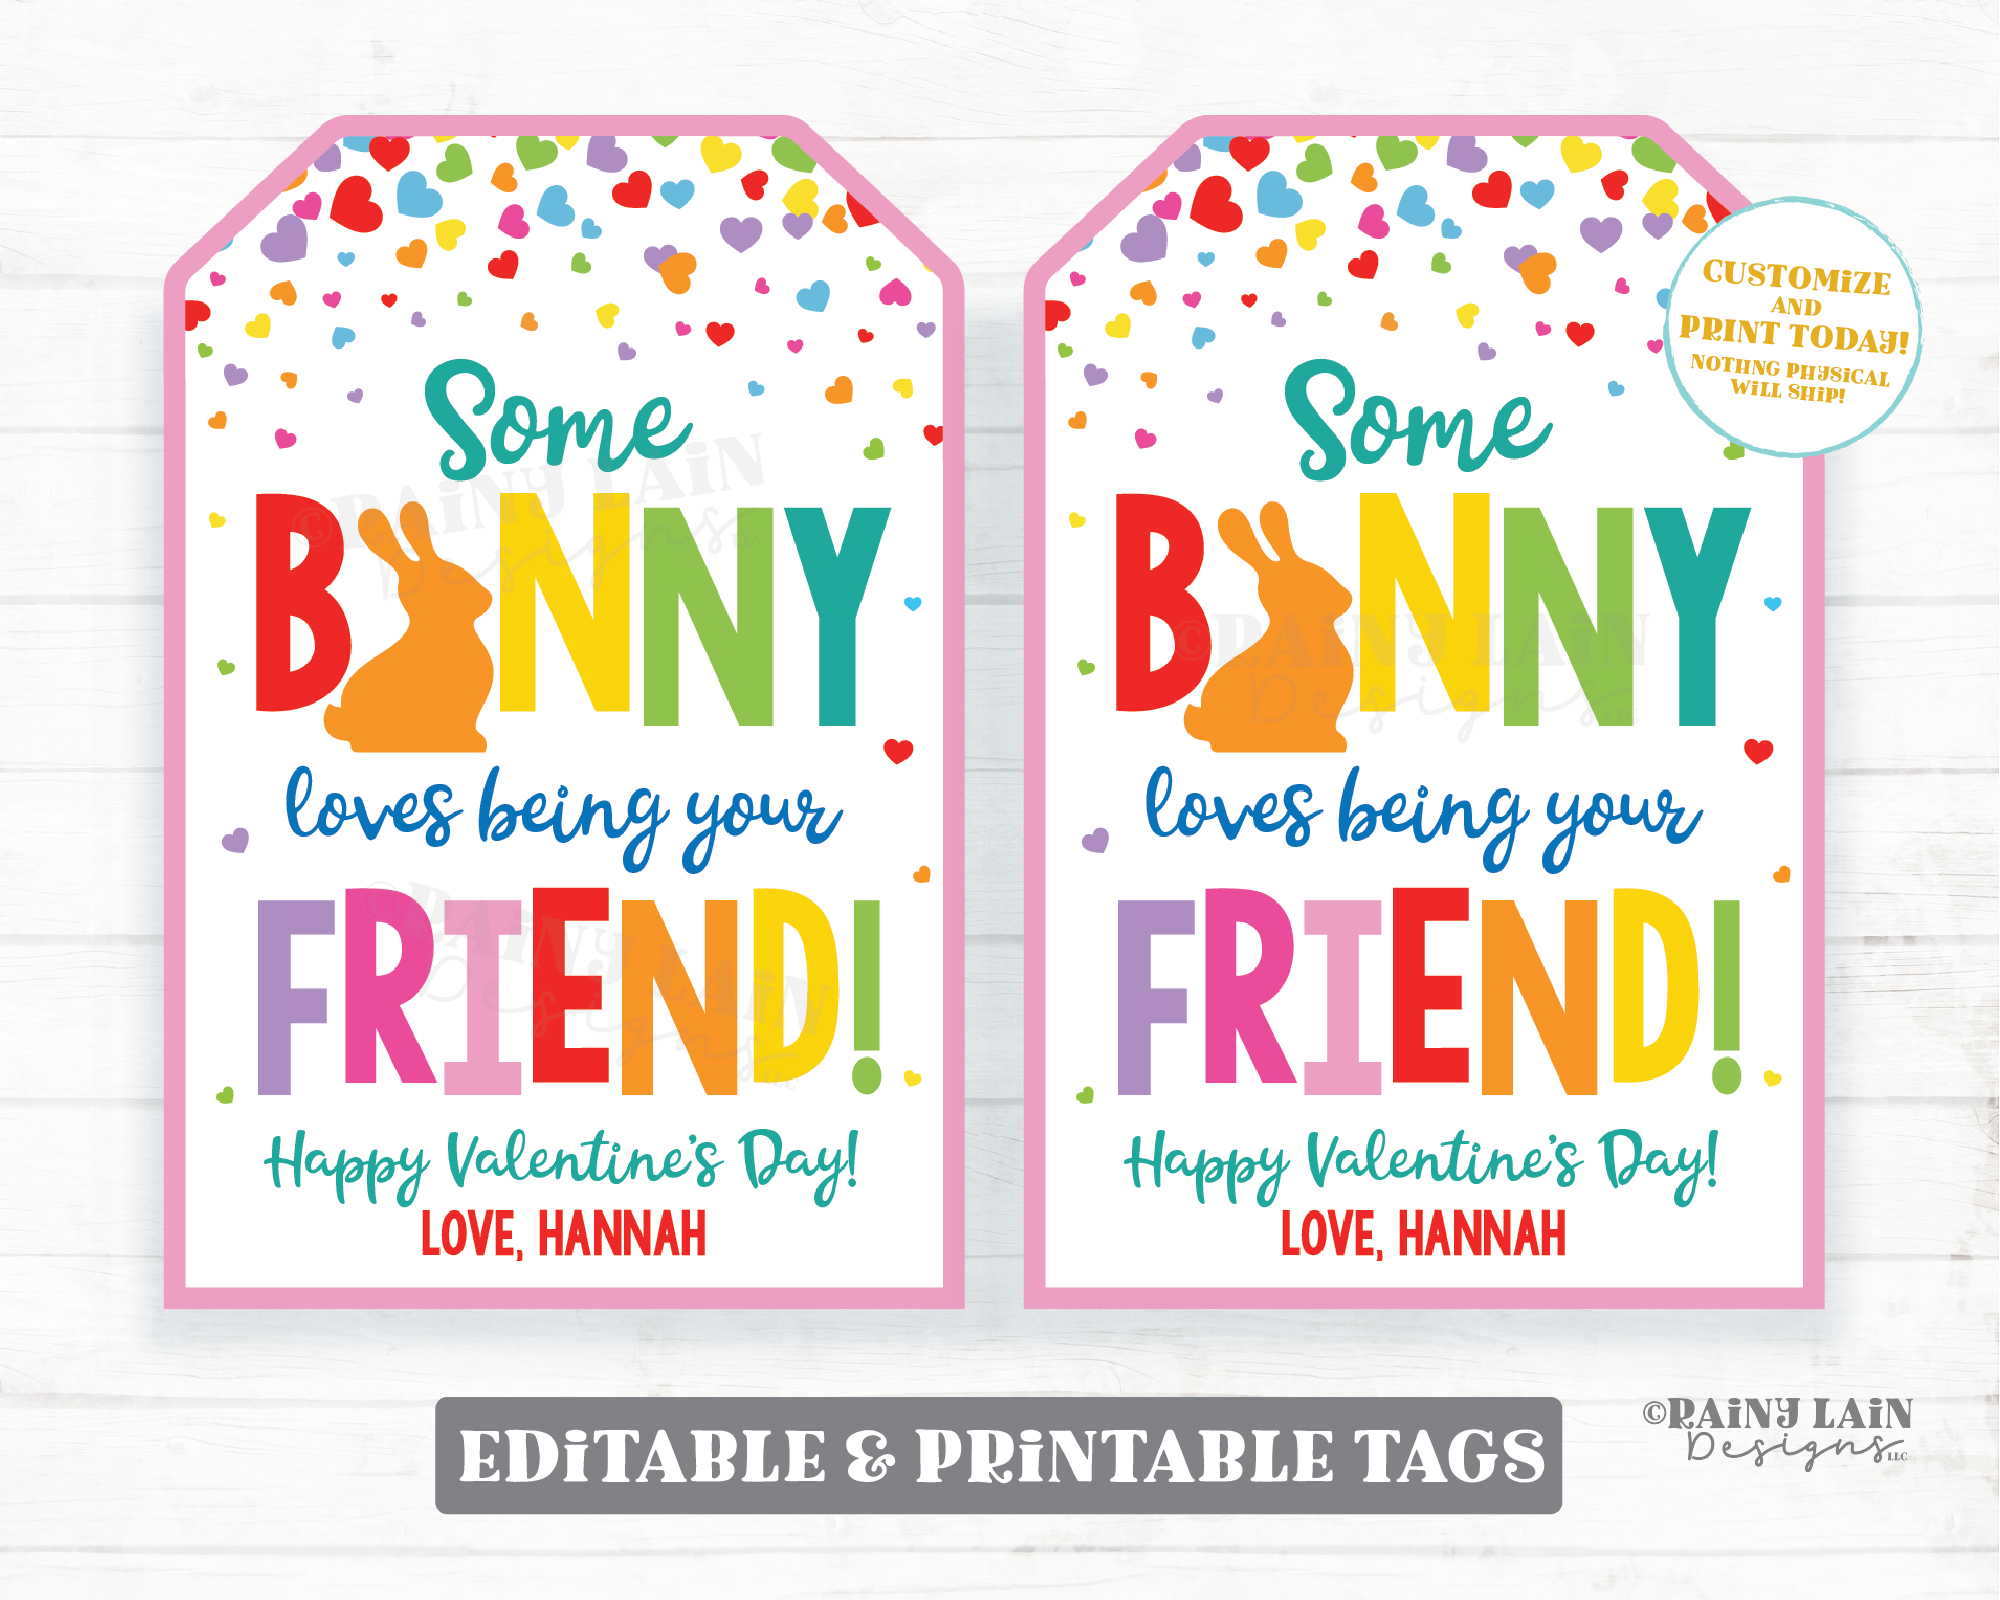 Bunny Crackers Valentine Tag Some Bunny Loves Being Your Friend Cheese Graham Snack Cheddar Bunnies Preschool Classroom Non-Candy Printable